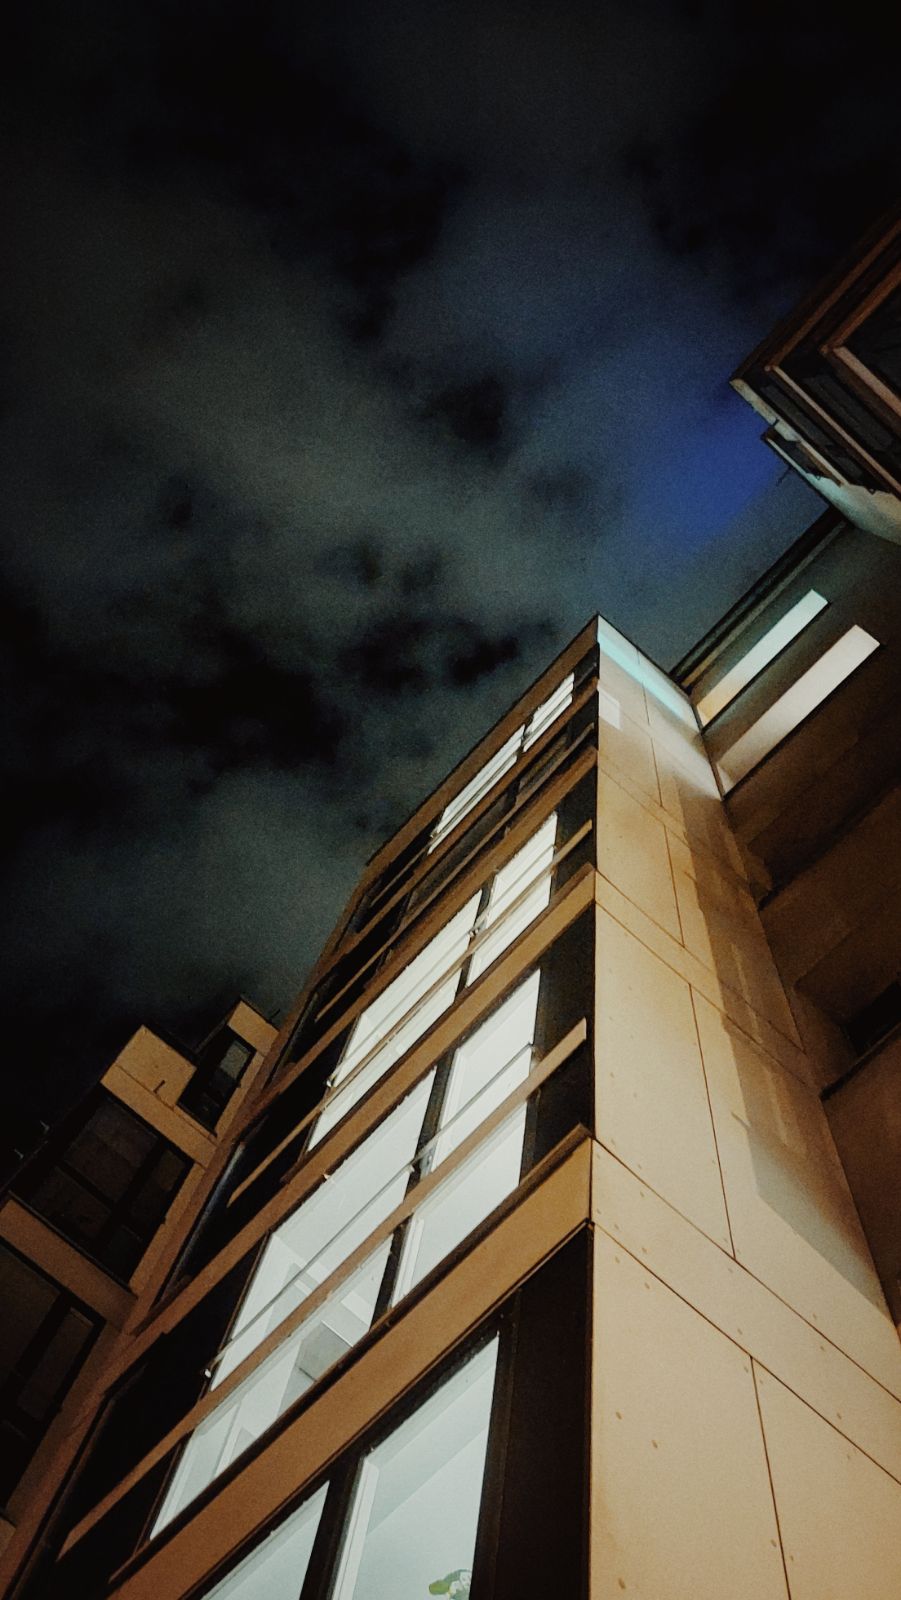 Lighted staircase of a high-rise at night. Troubled nightsky above.